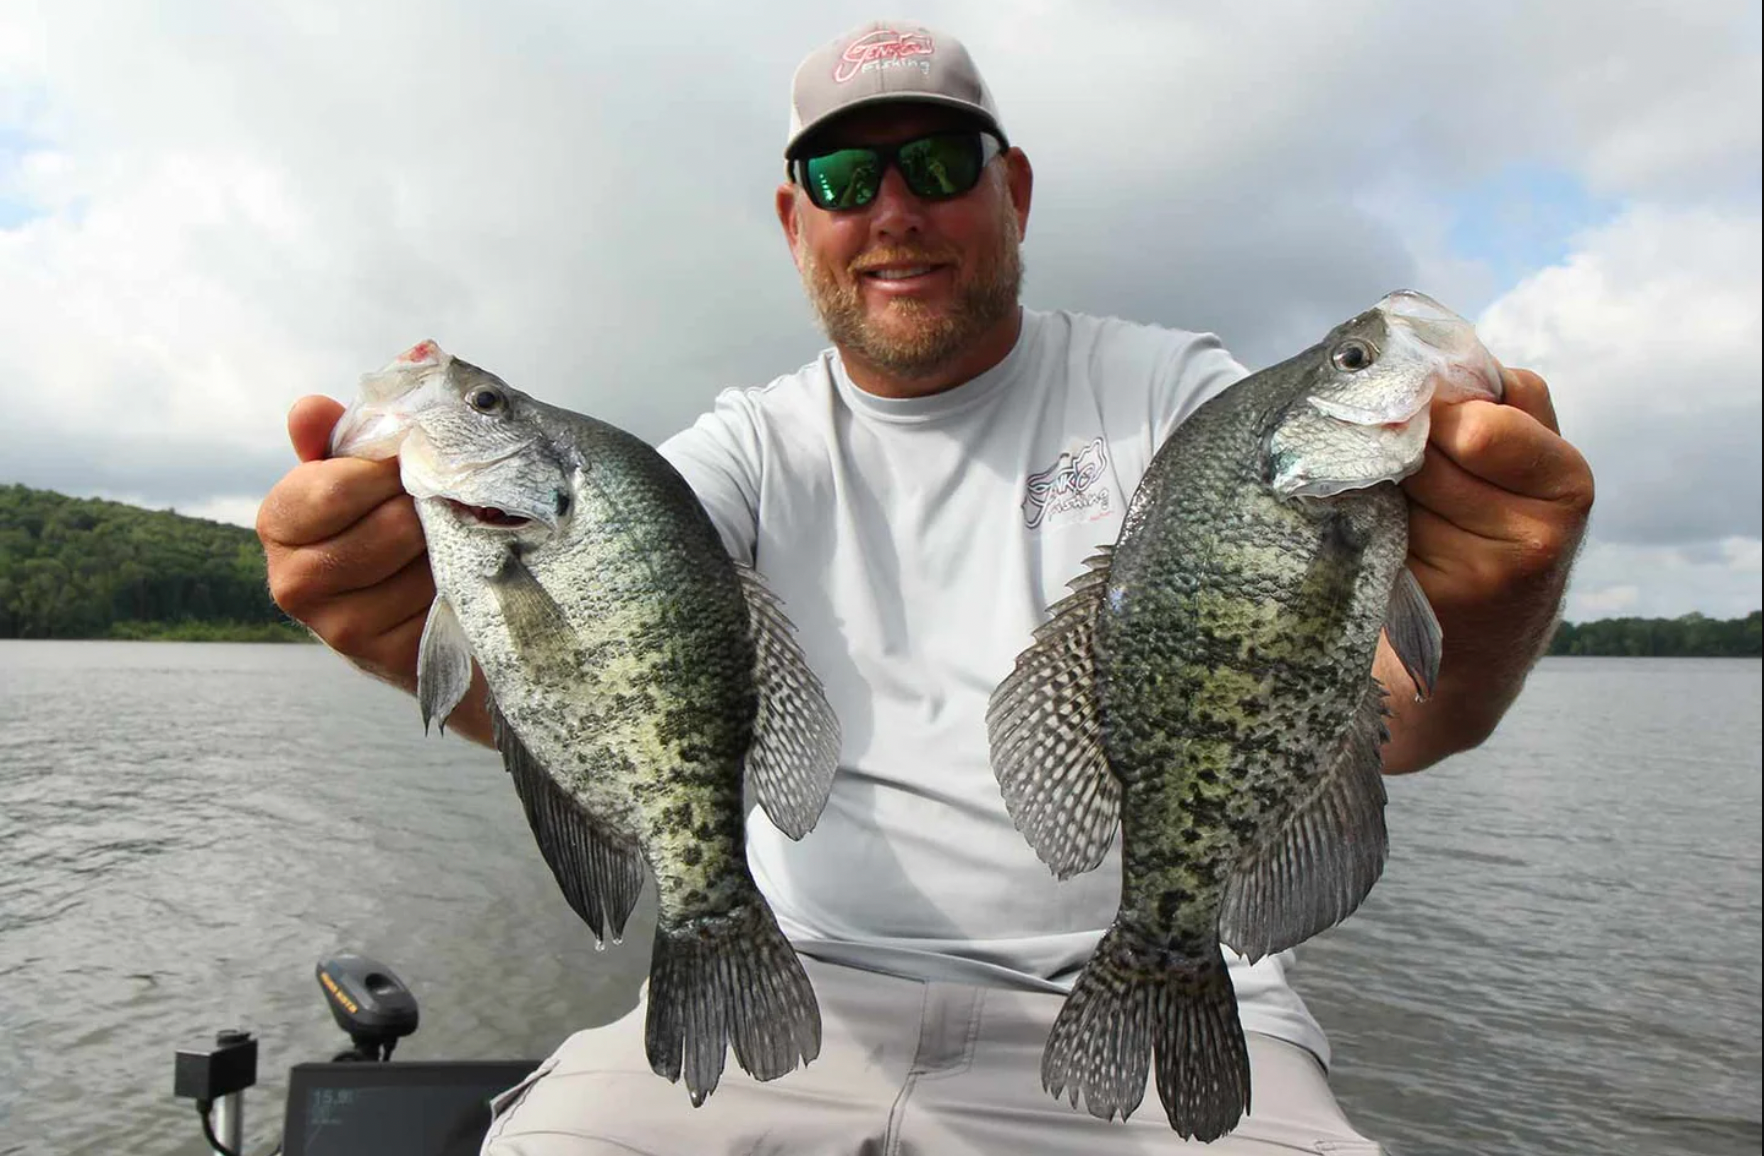 The 8 Best Live Bait Rigs for Crappie Fishing  Crappie fishing, Crappie  rigs, Live bait rig